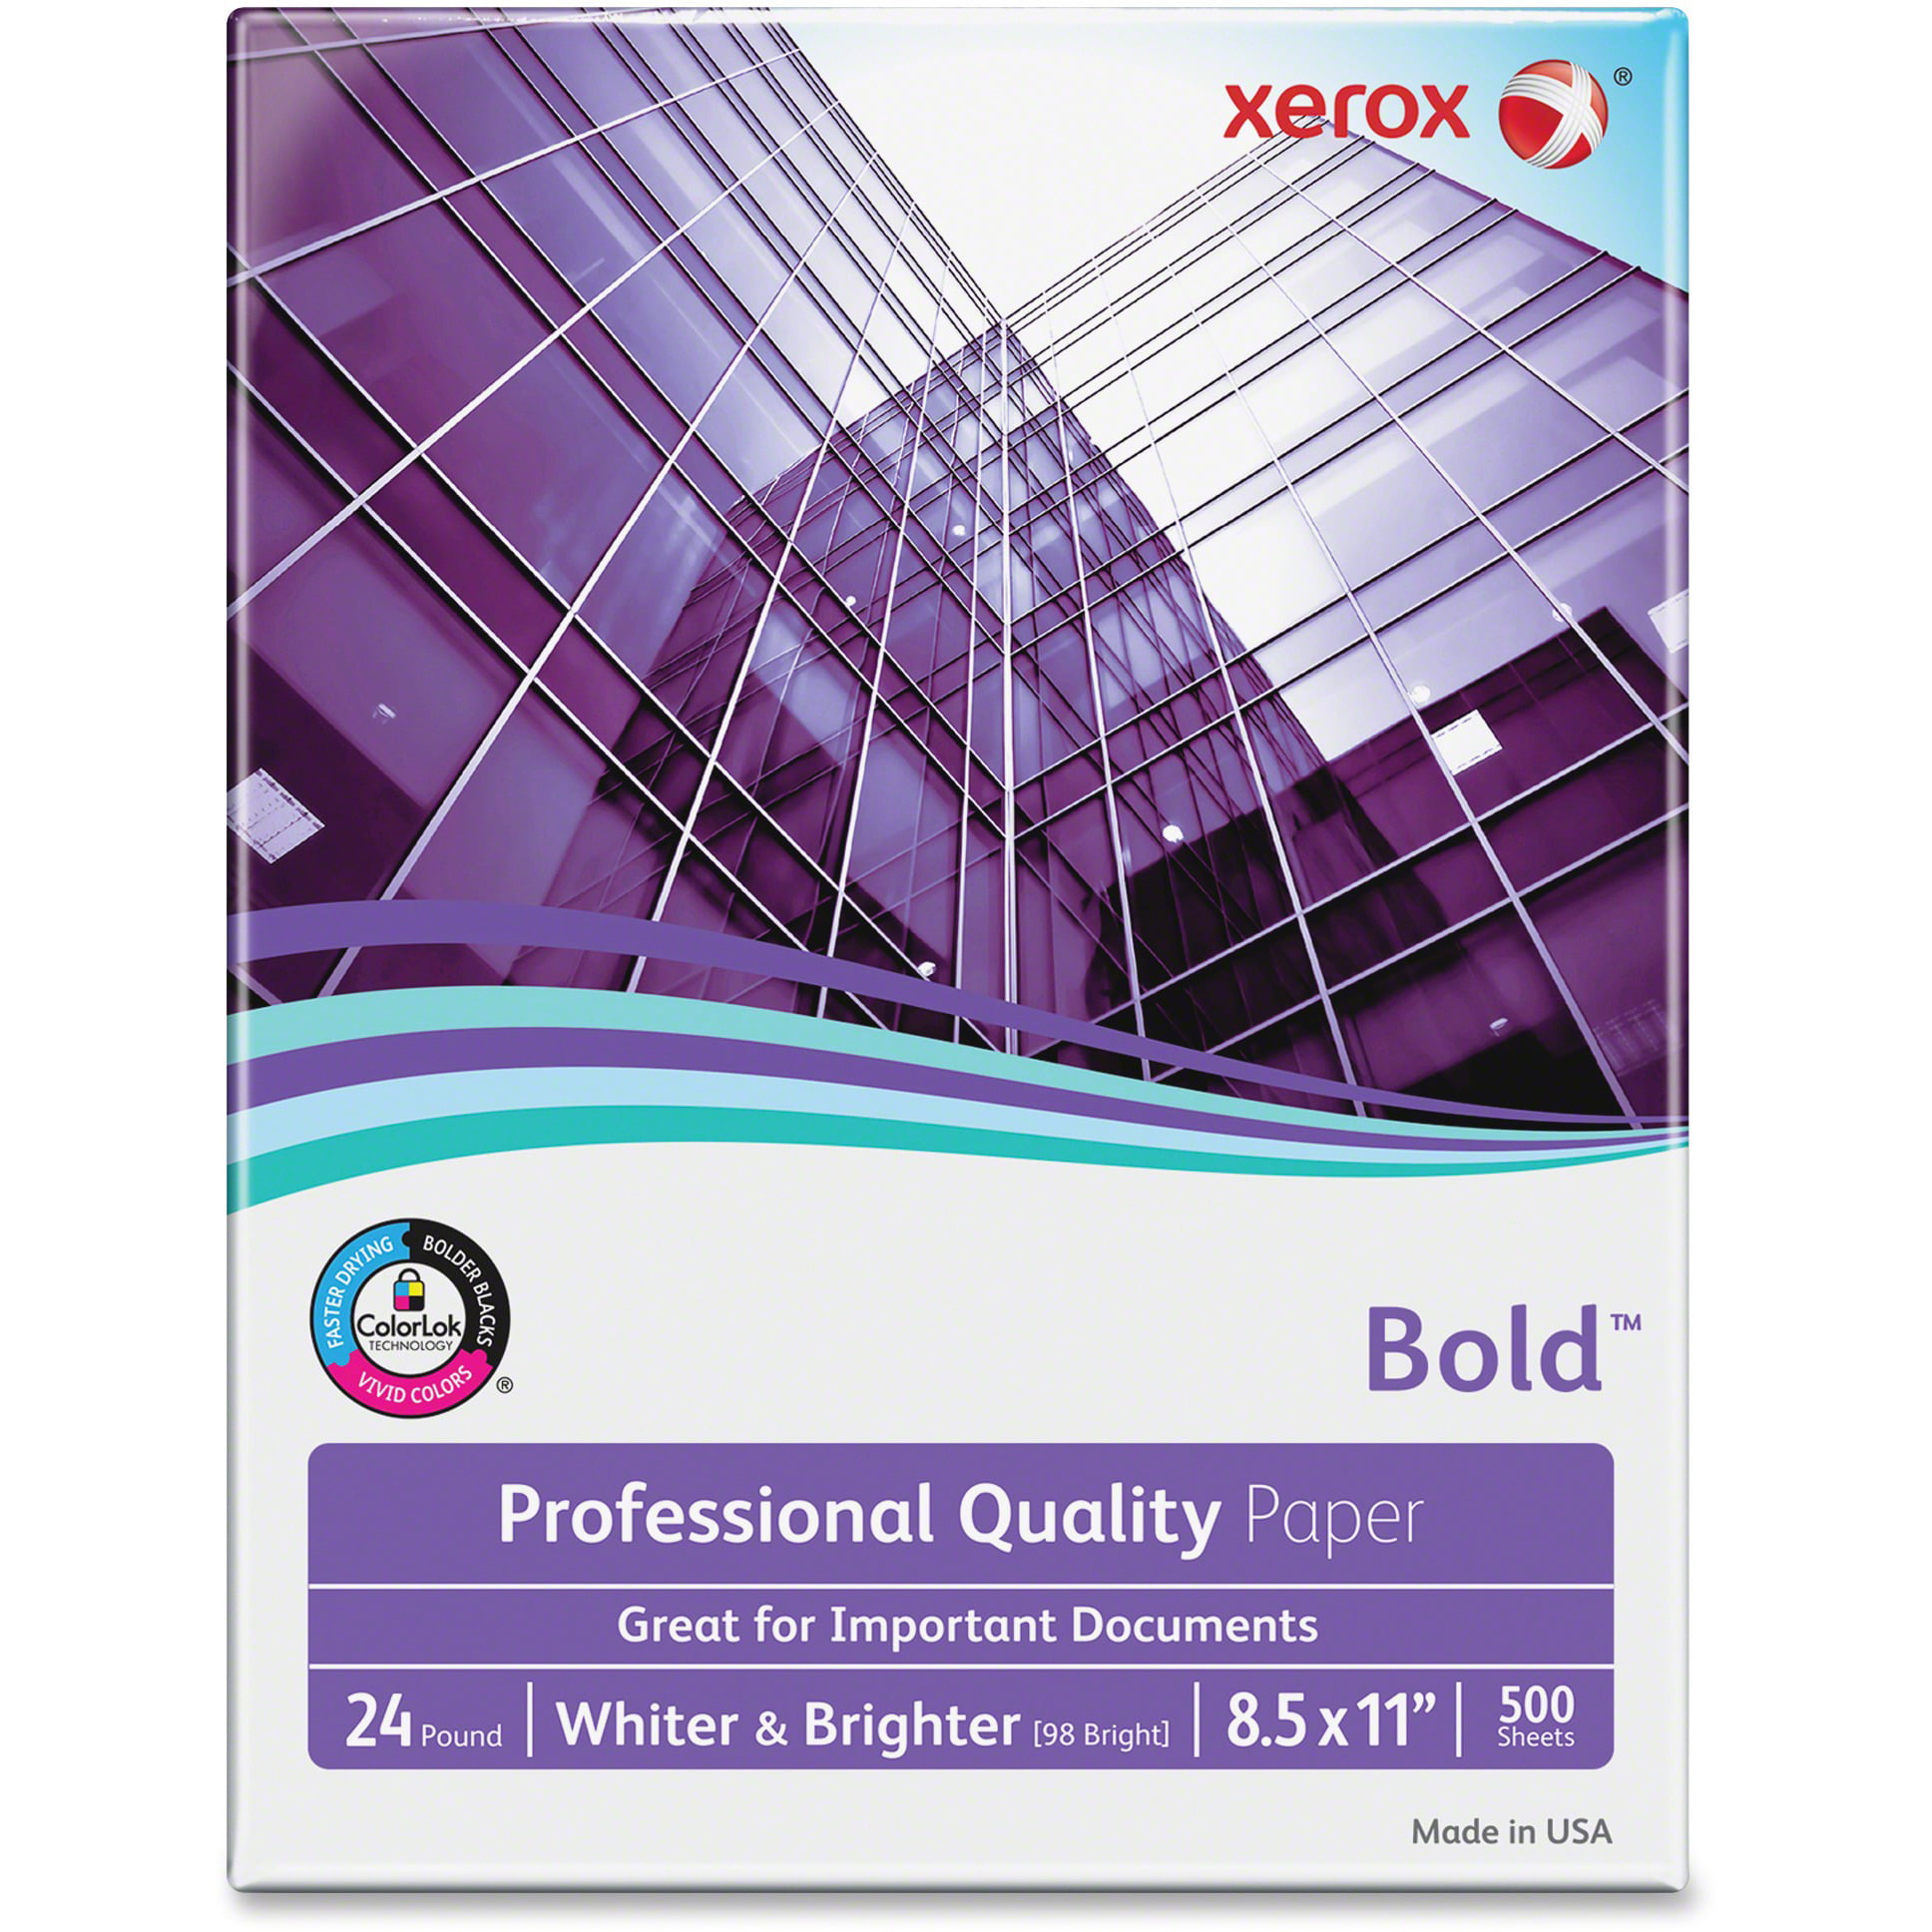 translucent paper for xerox printers